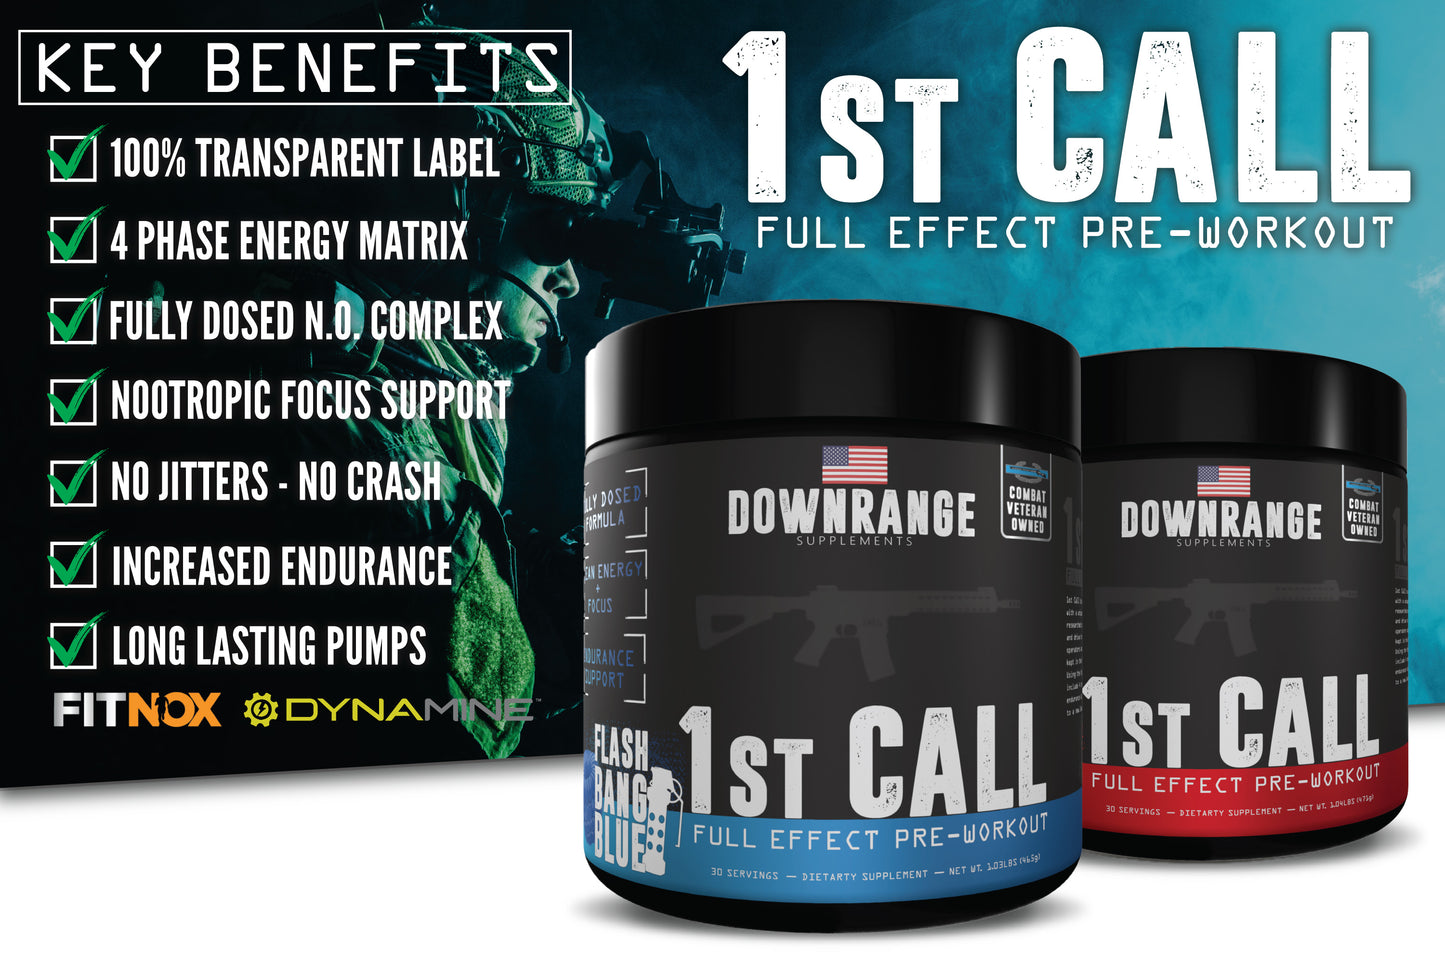 Downrange Supplements | First Call